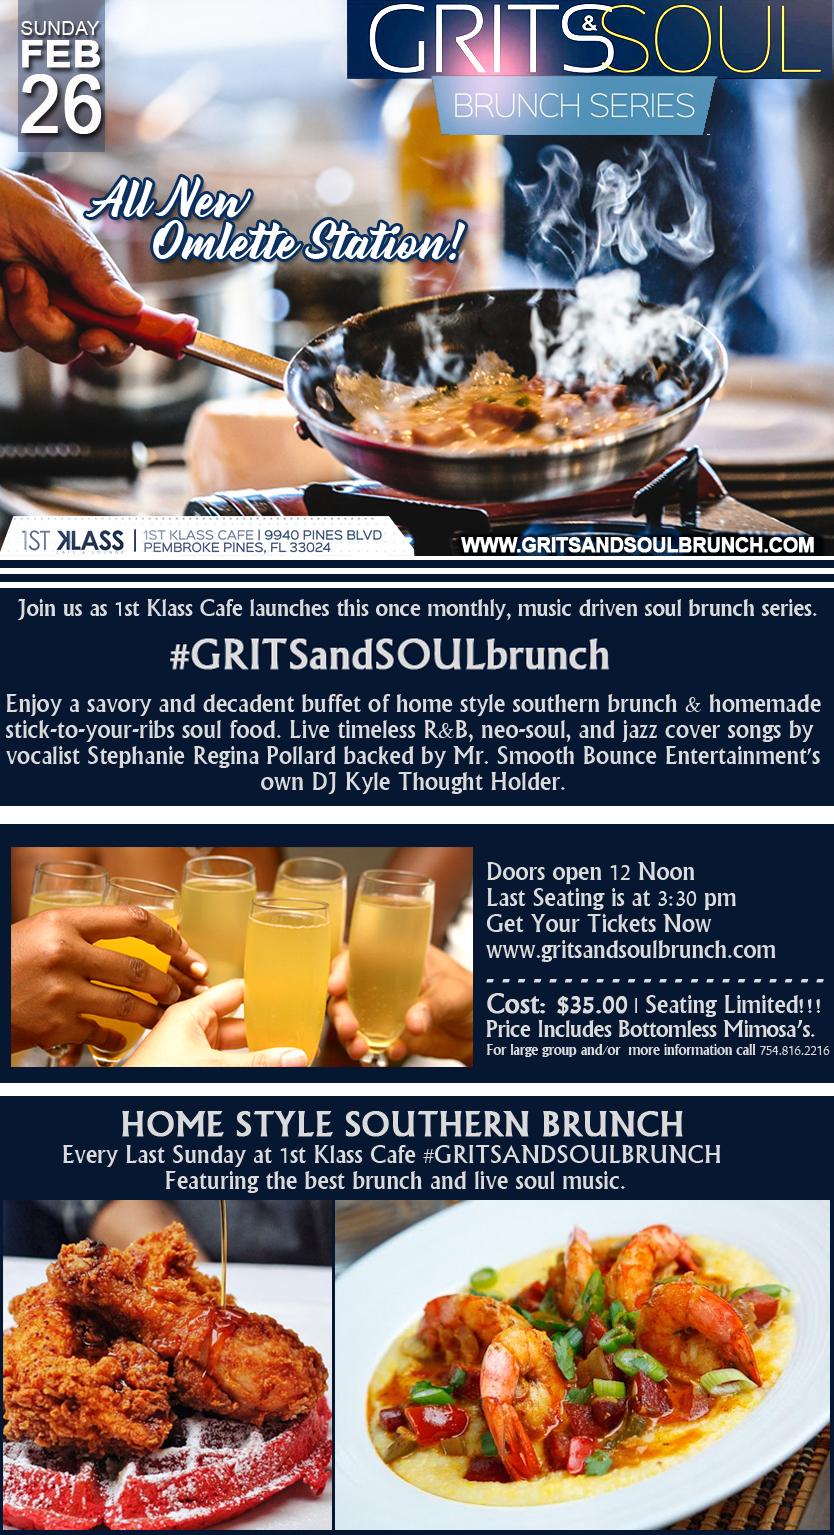 GRITS and SOUL Brunch Series | Live Music, Bottomless Mimosas and More